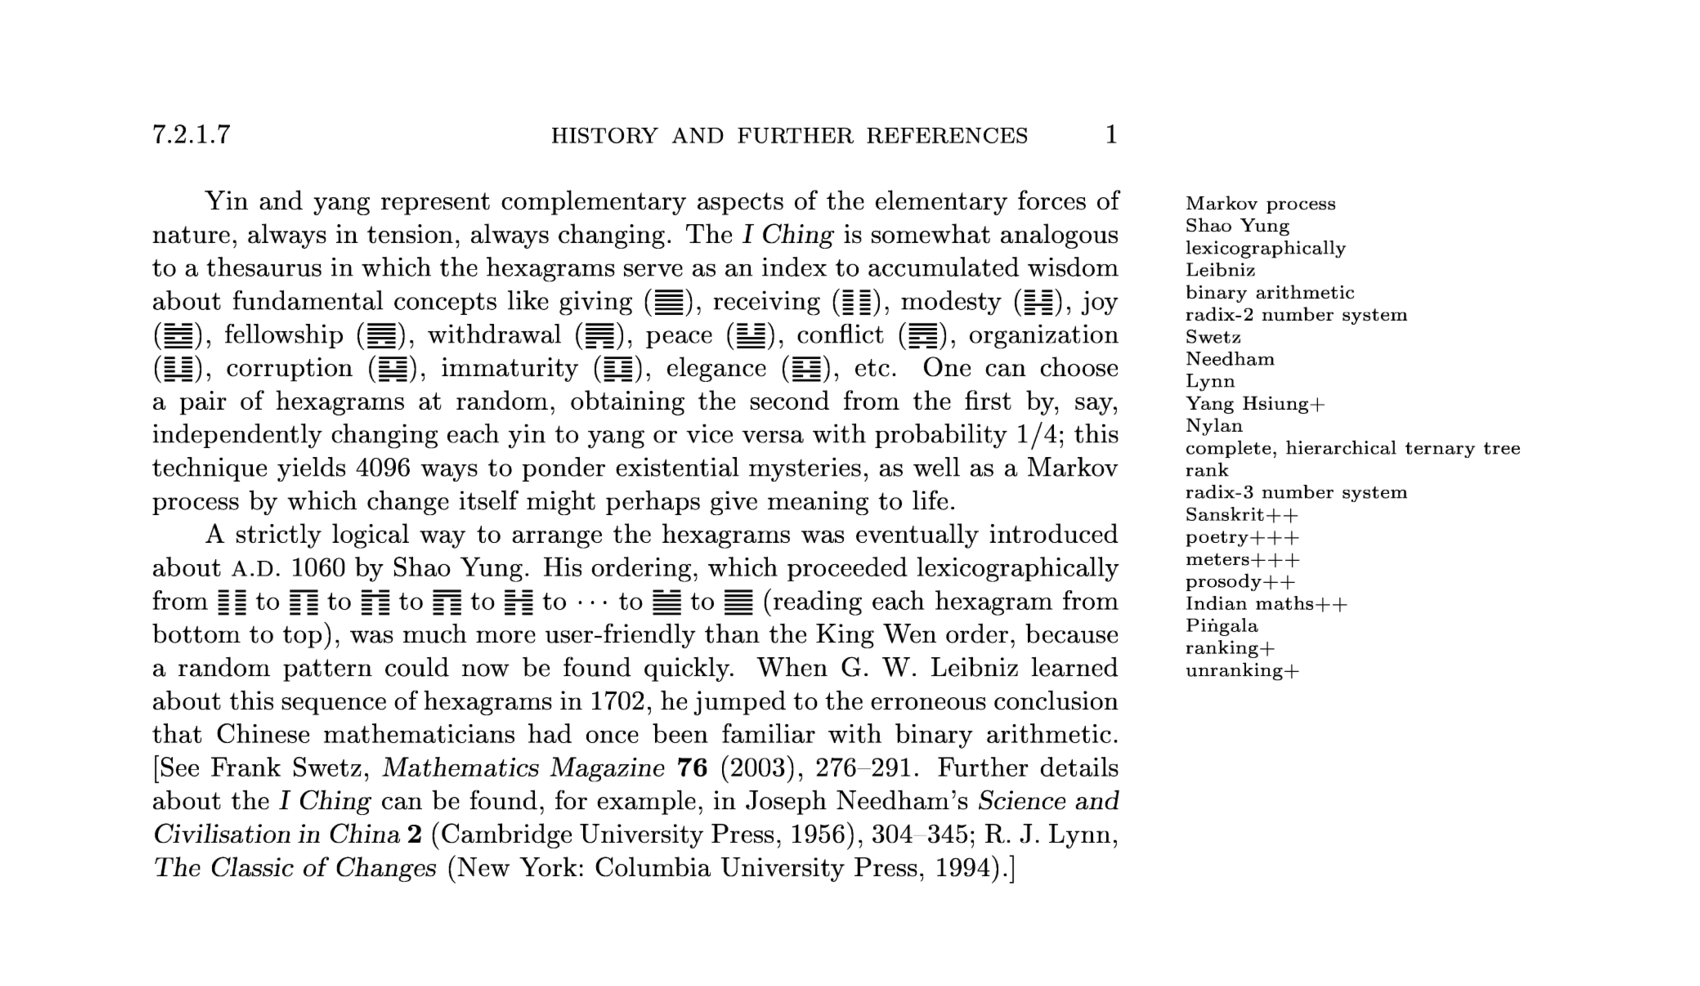 Margin notes showing keywords for discussion of Chinese/Indian algorithmic history in Knuth.